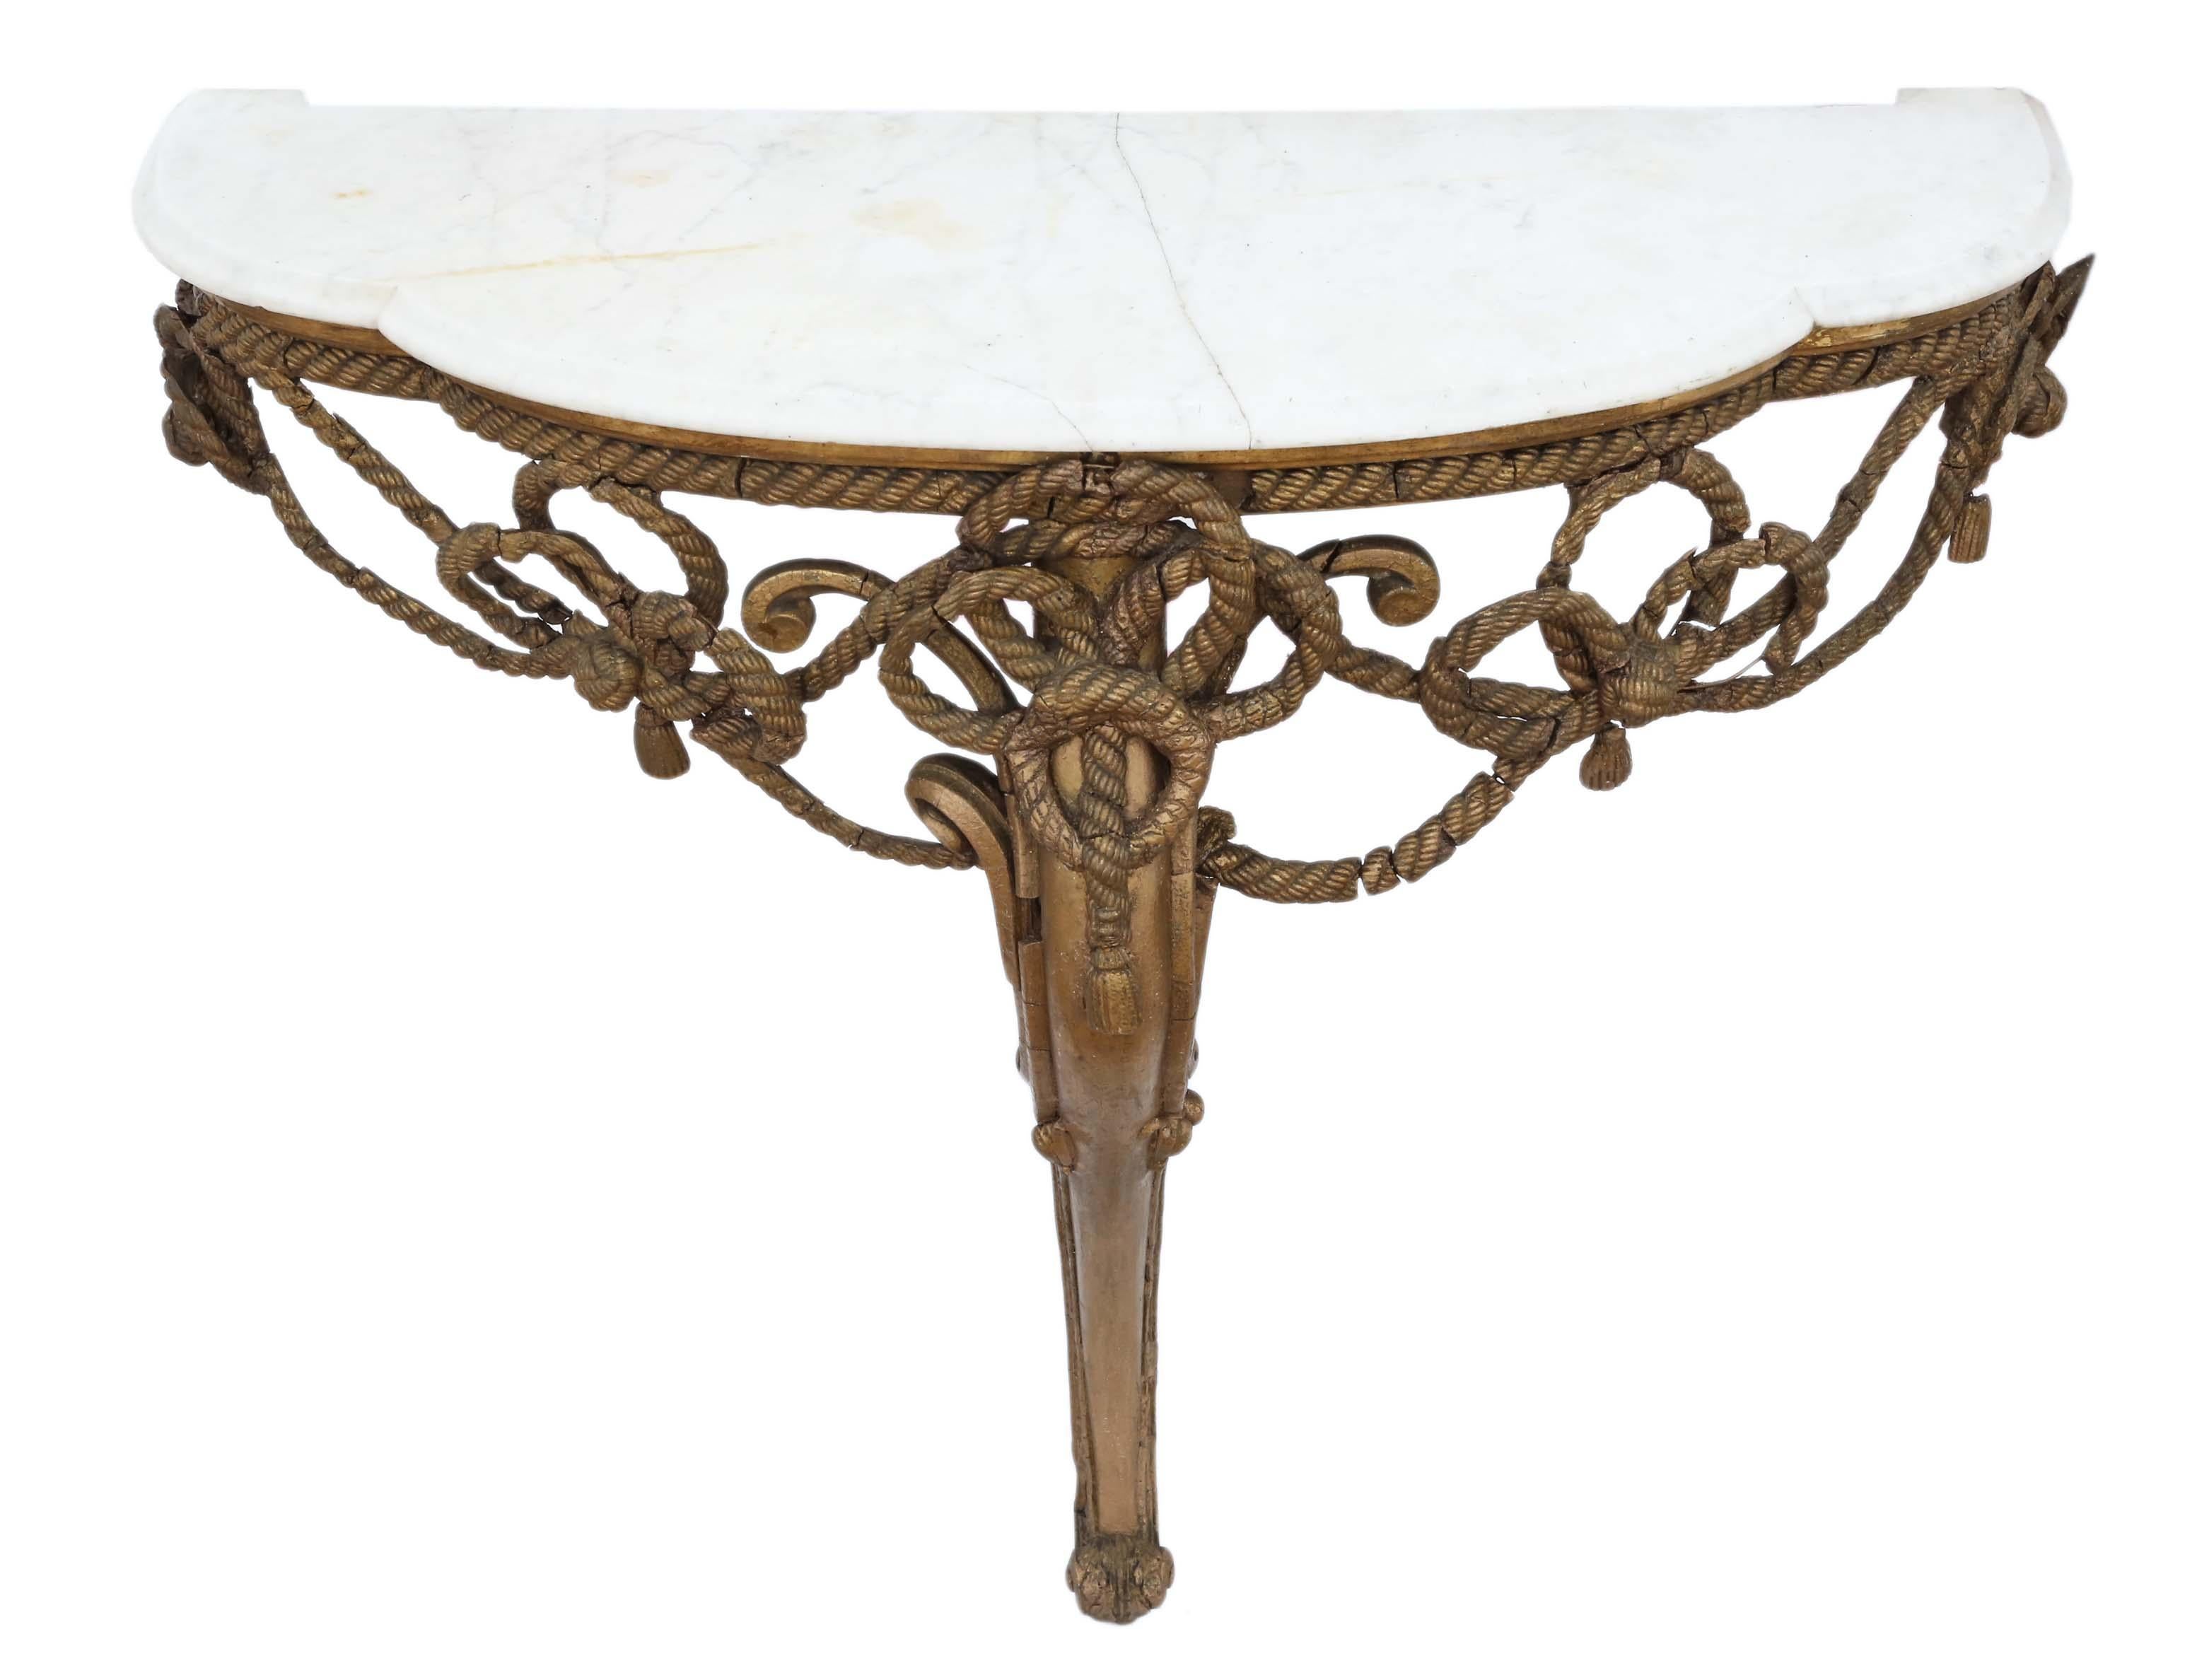 Antique 19th century gilt marble demilune console table.
This is a lovely posh shabby-chic table.
No loose joints and no woodworm.
Lovely proportions and could look amazing in the right location!
Overall maximum dimensions: 107cm W x 46cm D x